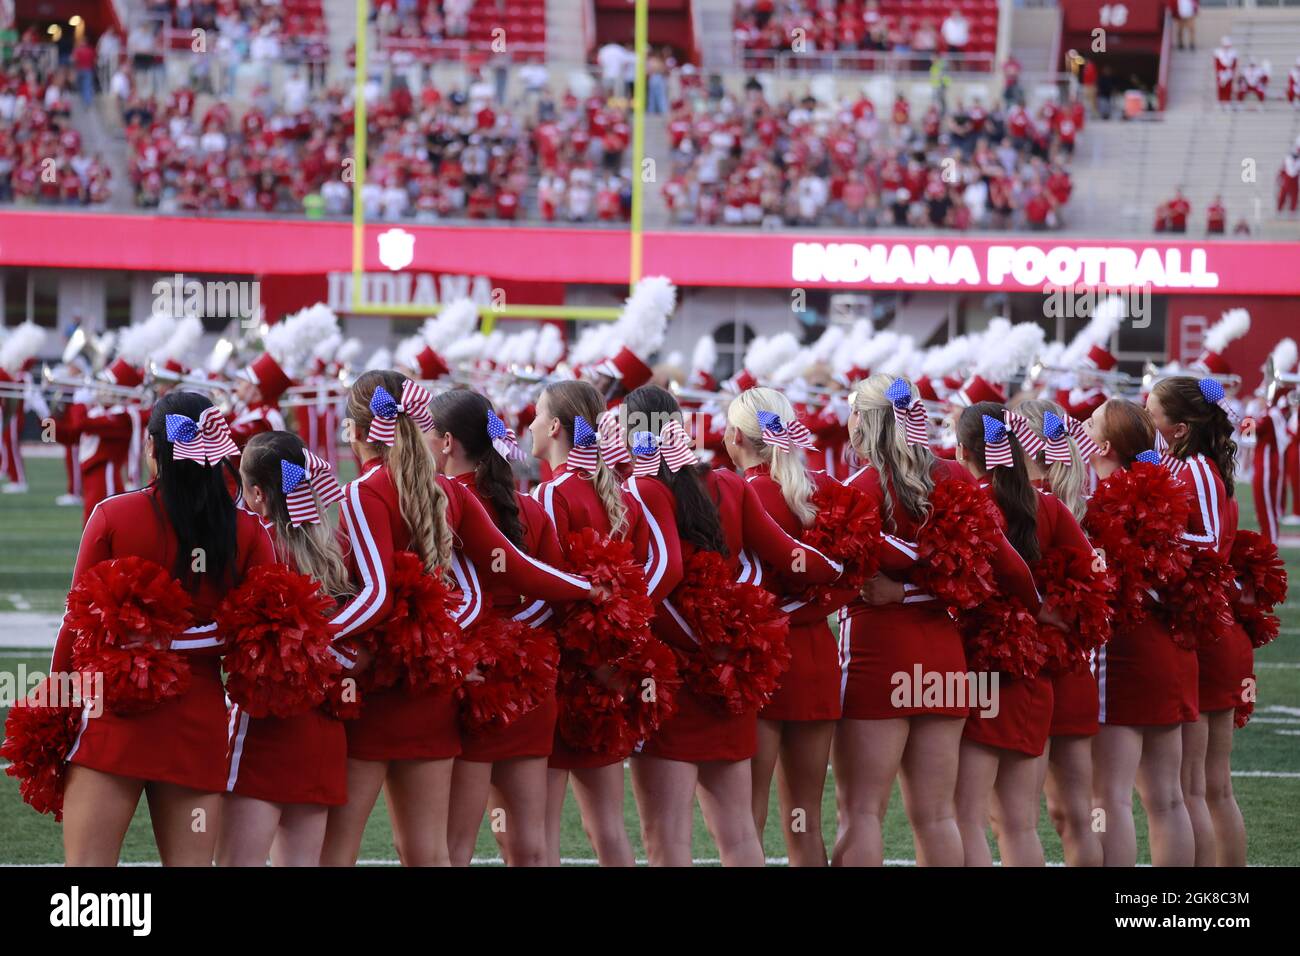 BLOOMINGTON, UNITED STATES - 2021/09/11: Indiana University cheerleaders wear American flag ribbons in their hair on the anniversary of 9/11 before IU plays against Idaho during an NCAA football game on September 11, 2021 at Memorial Stadium in Bloomington, Ind. The Hoosiers beat the Vandals 56-14. Stock Photo